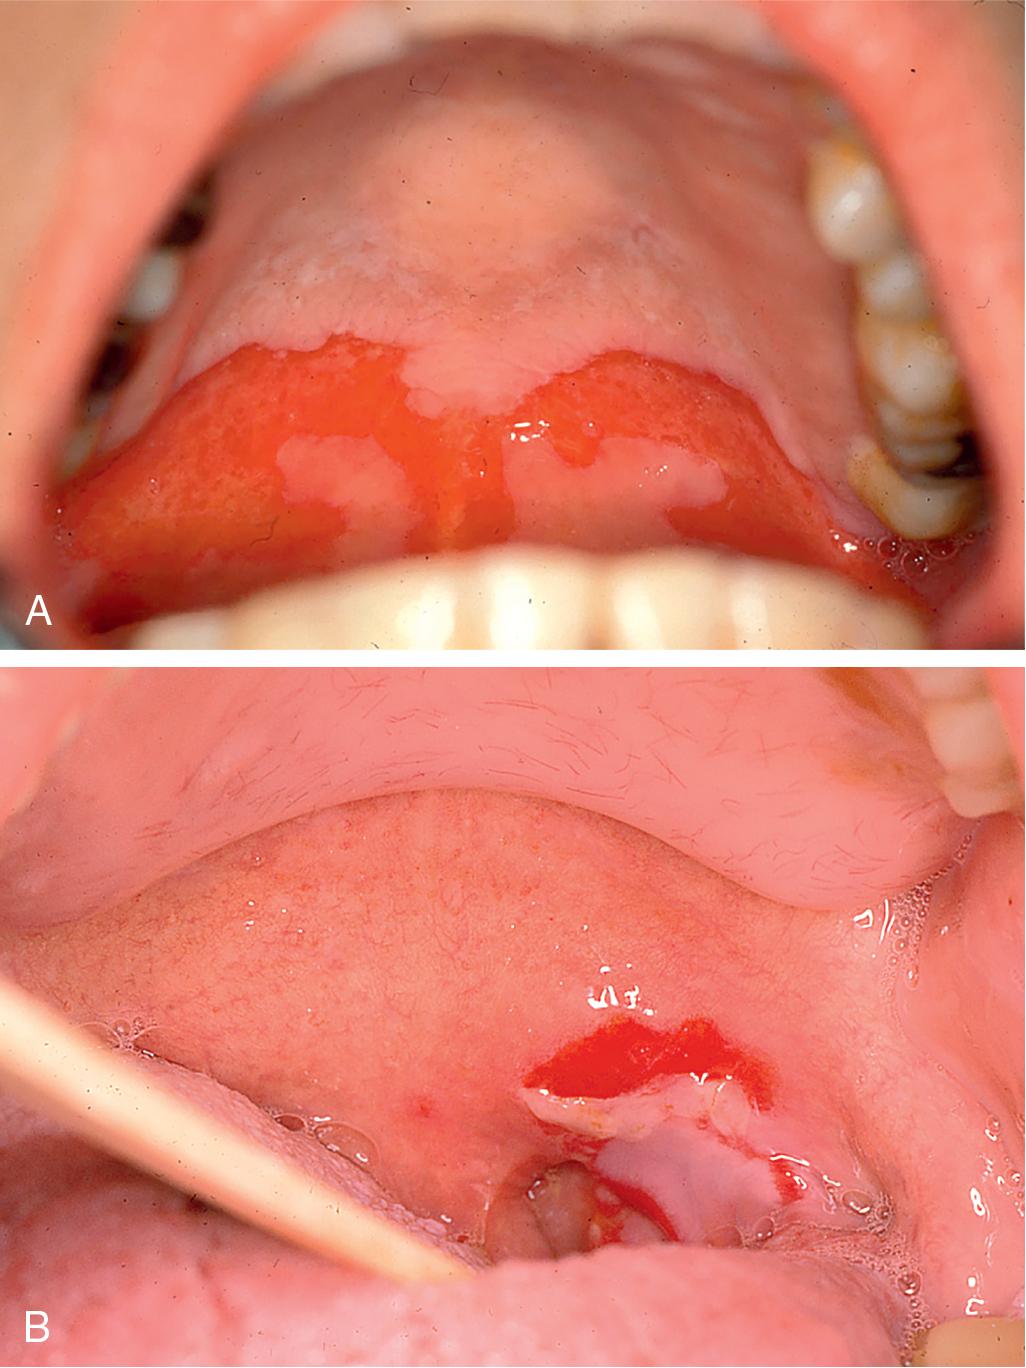 Fig. 24.3, Two images of pemphigus with lesions of the palate. Essentially all patients with pemphigus develop painful oral mucosal erosions, with the most common sites being the buccal and palatine mucosa. These lesions are flaccid, thin-walled, easily ruptured blisters.